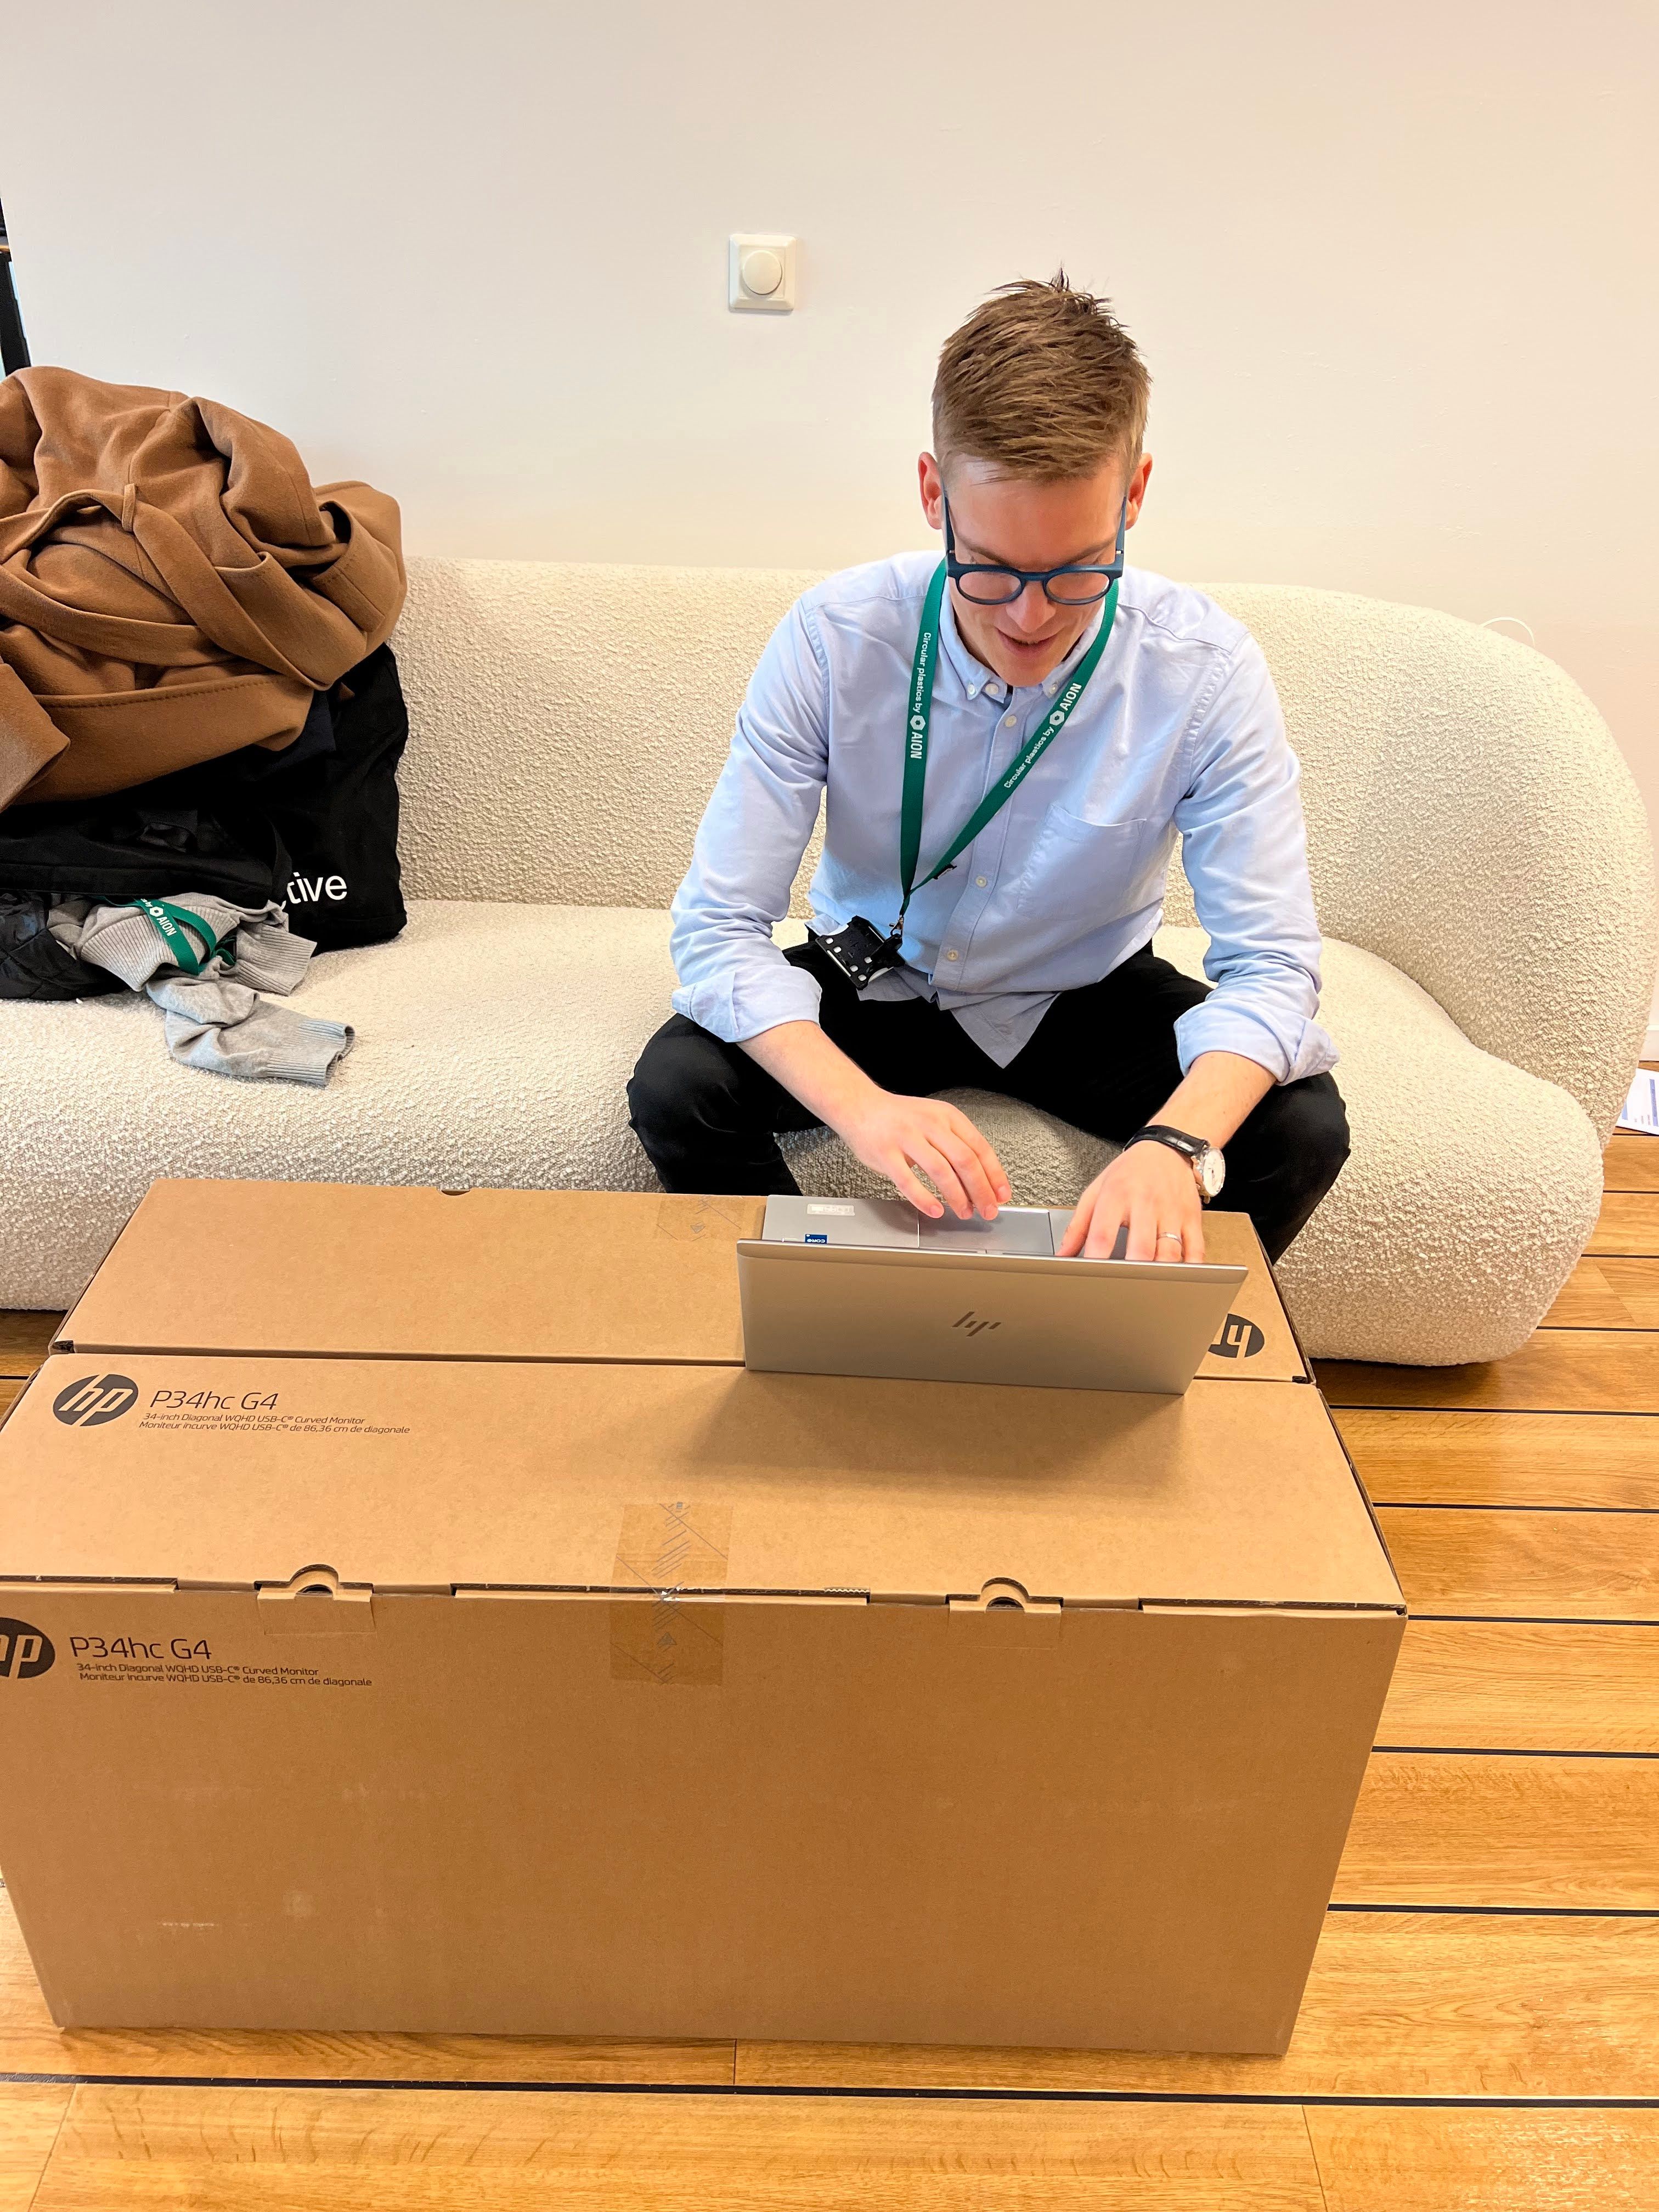 Senior Manager Circular Solutions, Søren Holm Grundt, working from a cardboard box